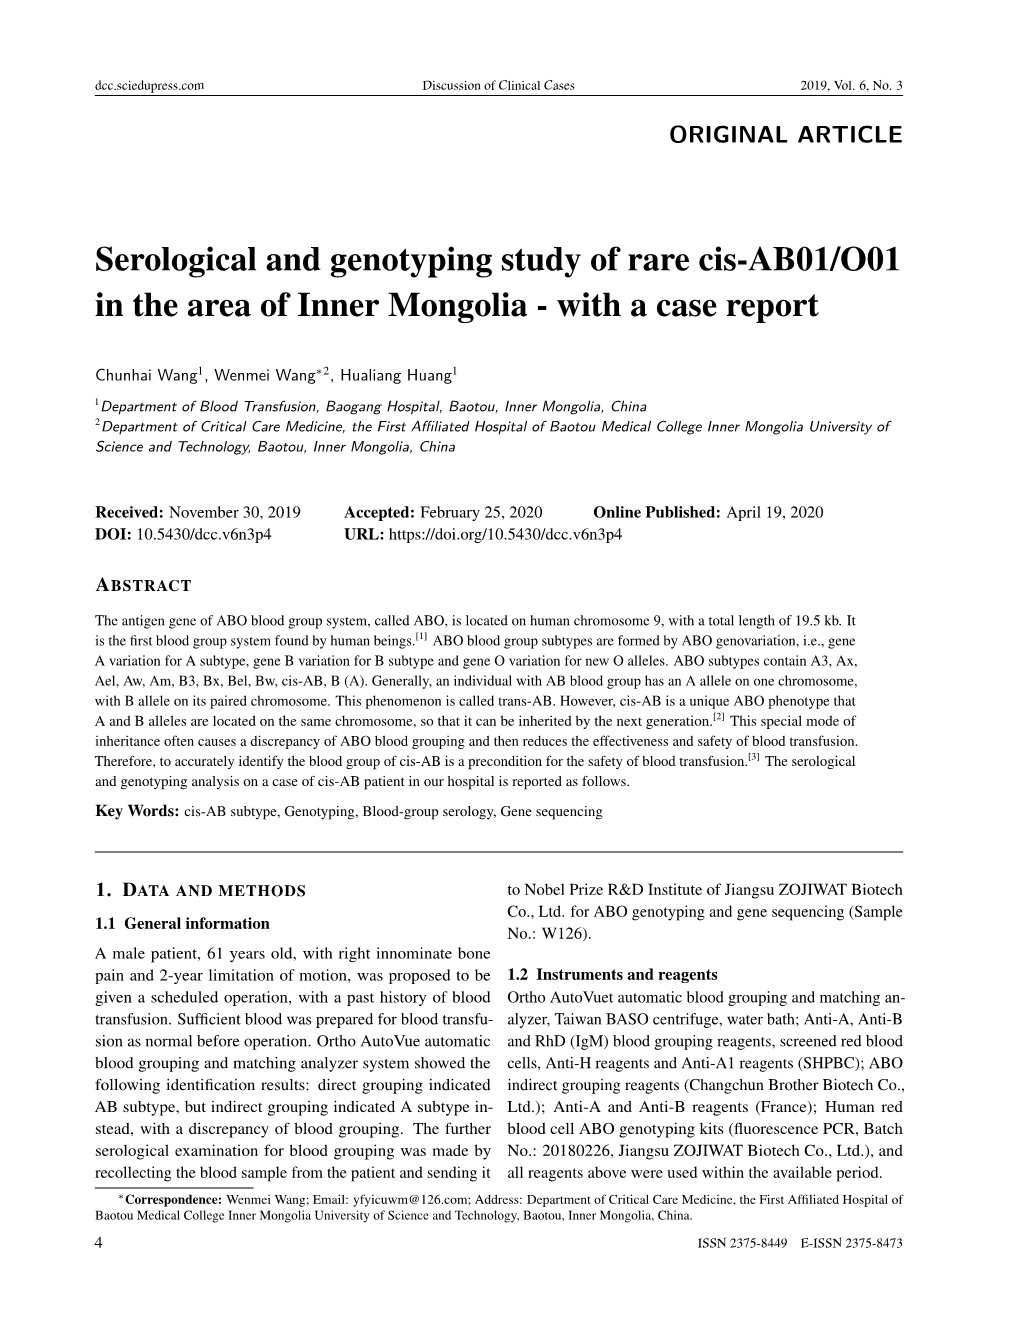 Serological and Genotyping Study of Rare Cis-AB01/O01 in the Area of Inner Mongolia - with a Case Report